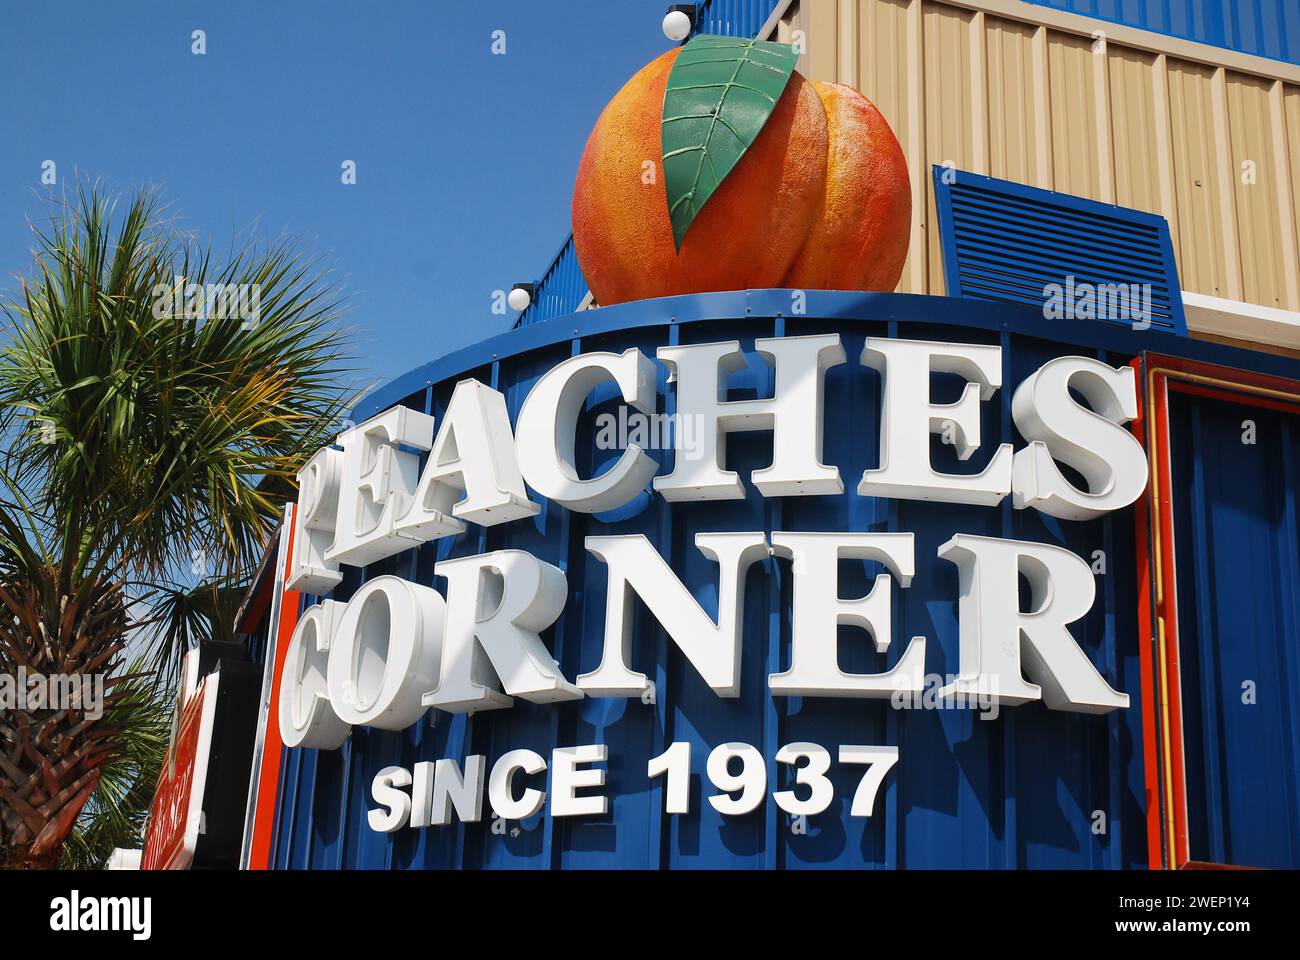 Peaches Corner, a popular souvenir shop in Myrtle Beach, South Carolina, has the large fruit over the entrance sign Stock Photo